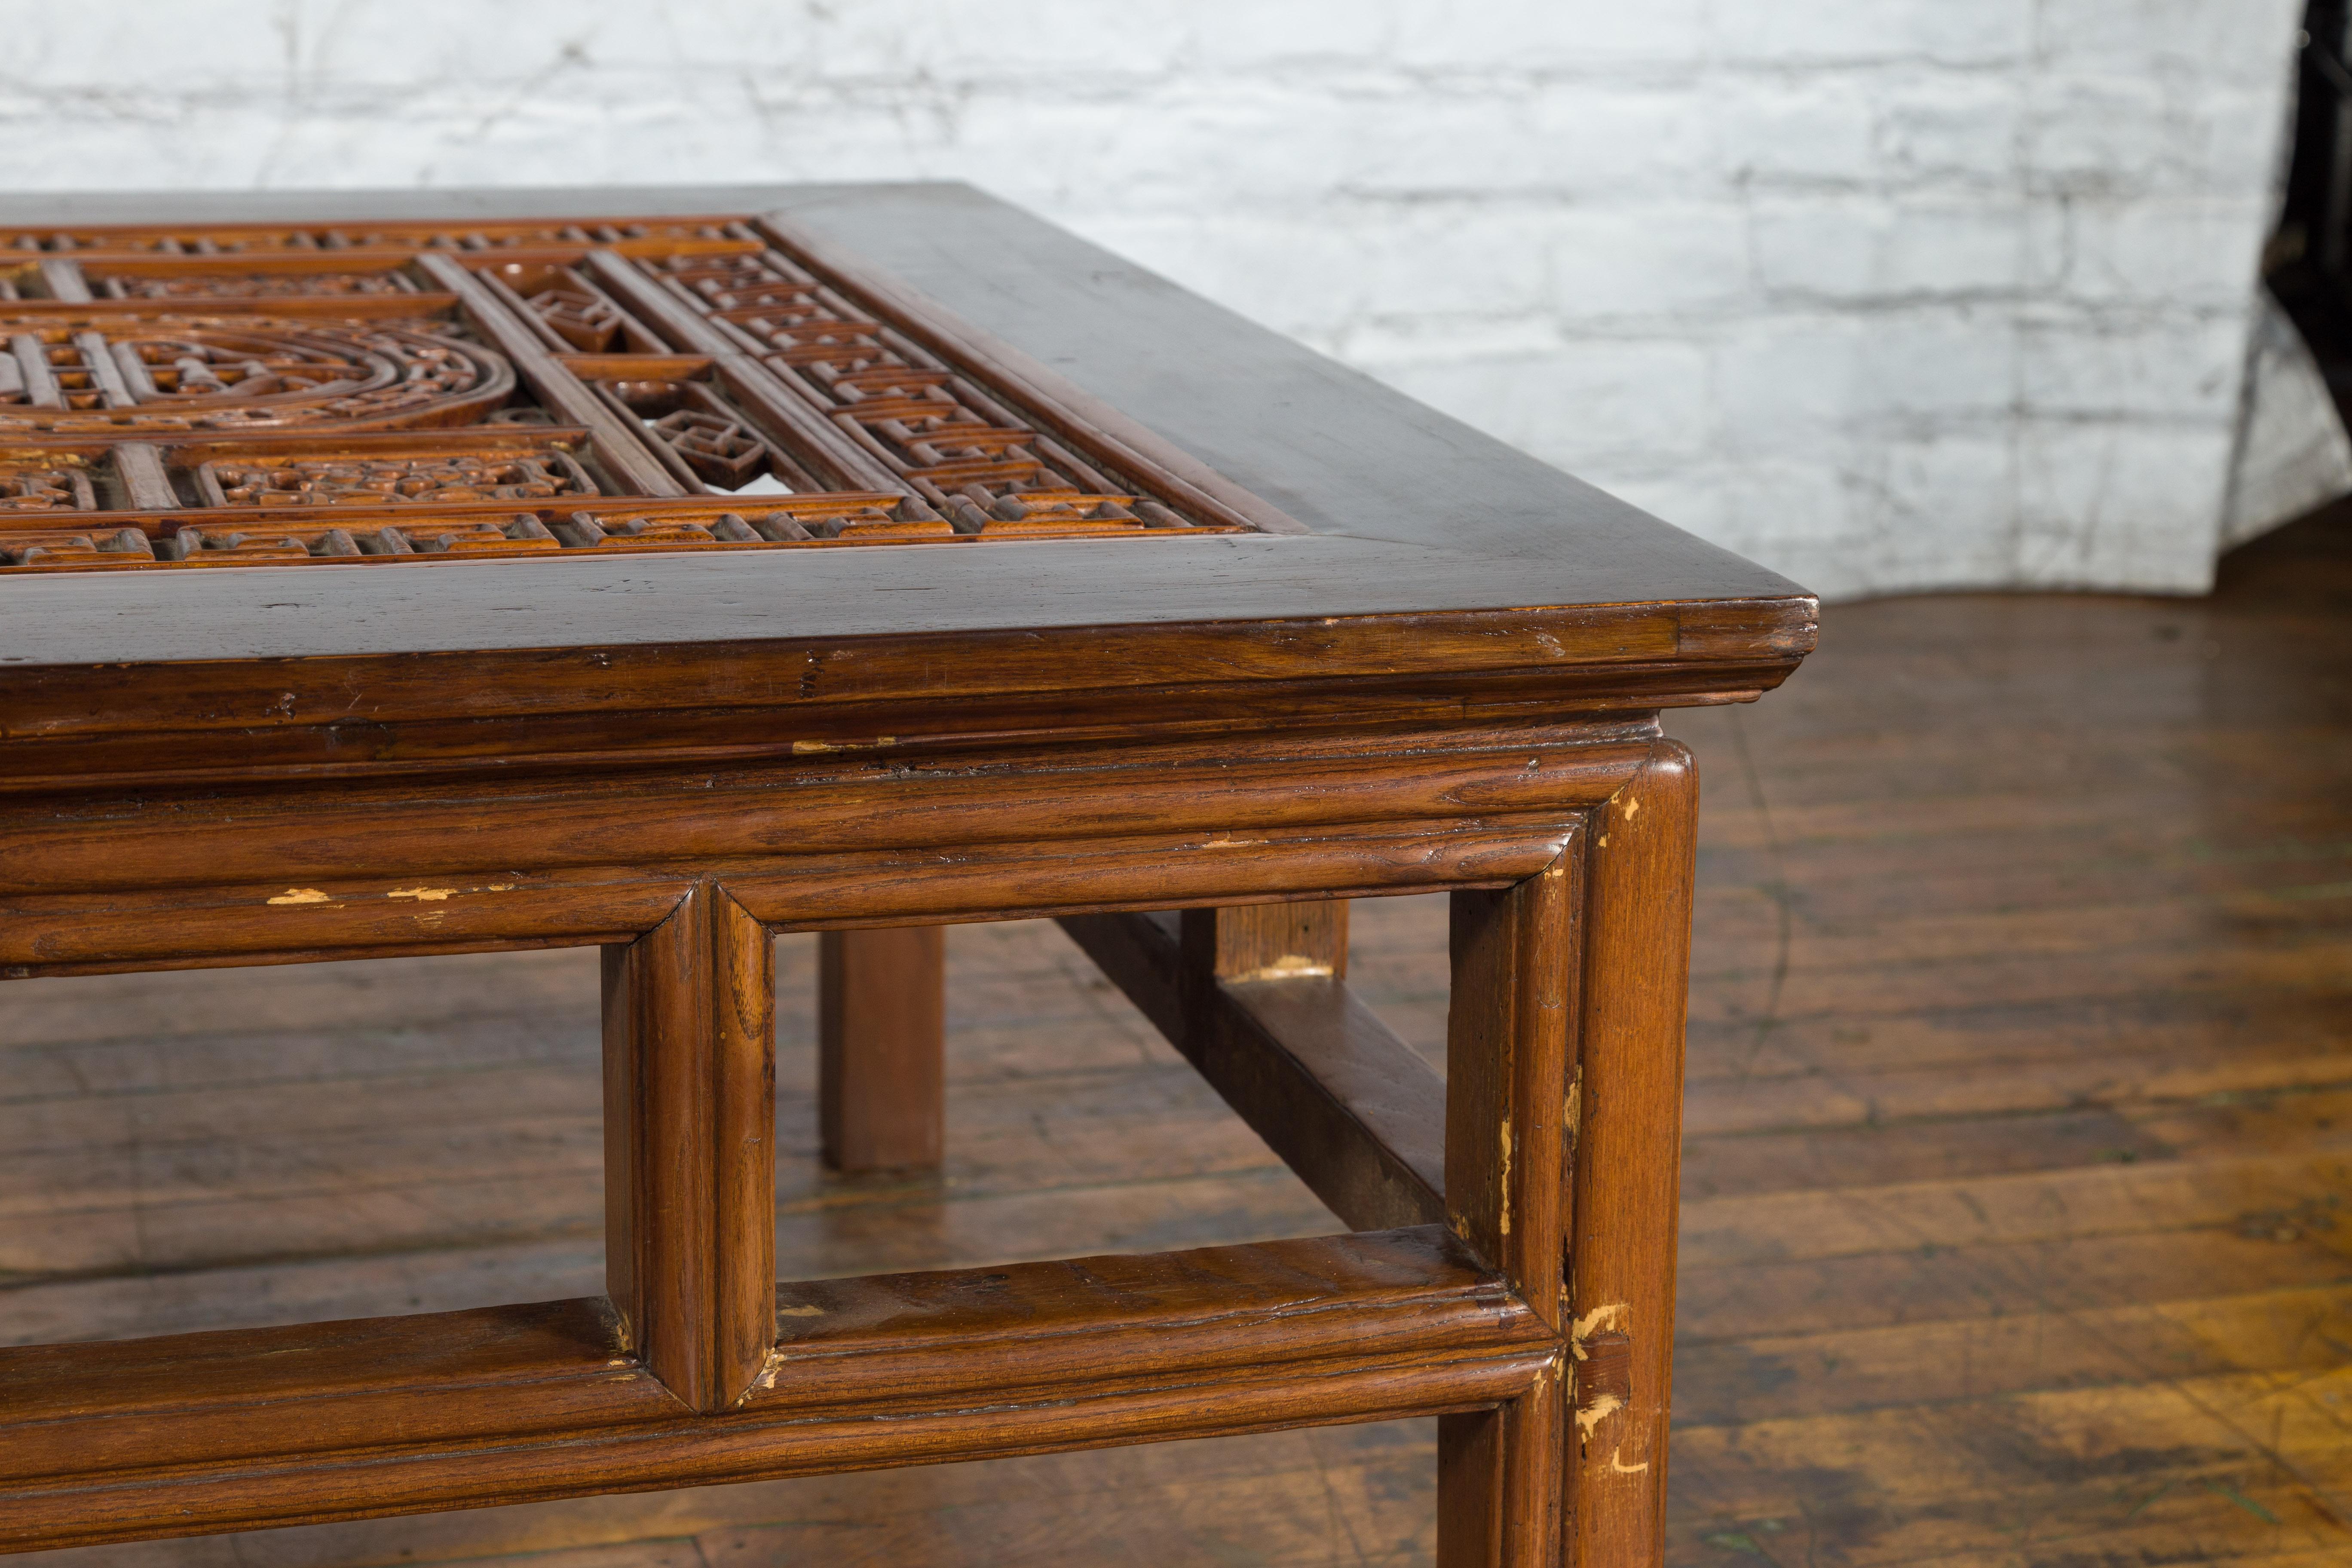 Chinese Qing Dynasty Period 19th Century Coffee Table with Carved Fretwork Top For Sale 1